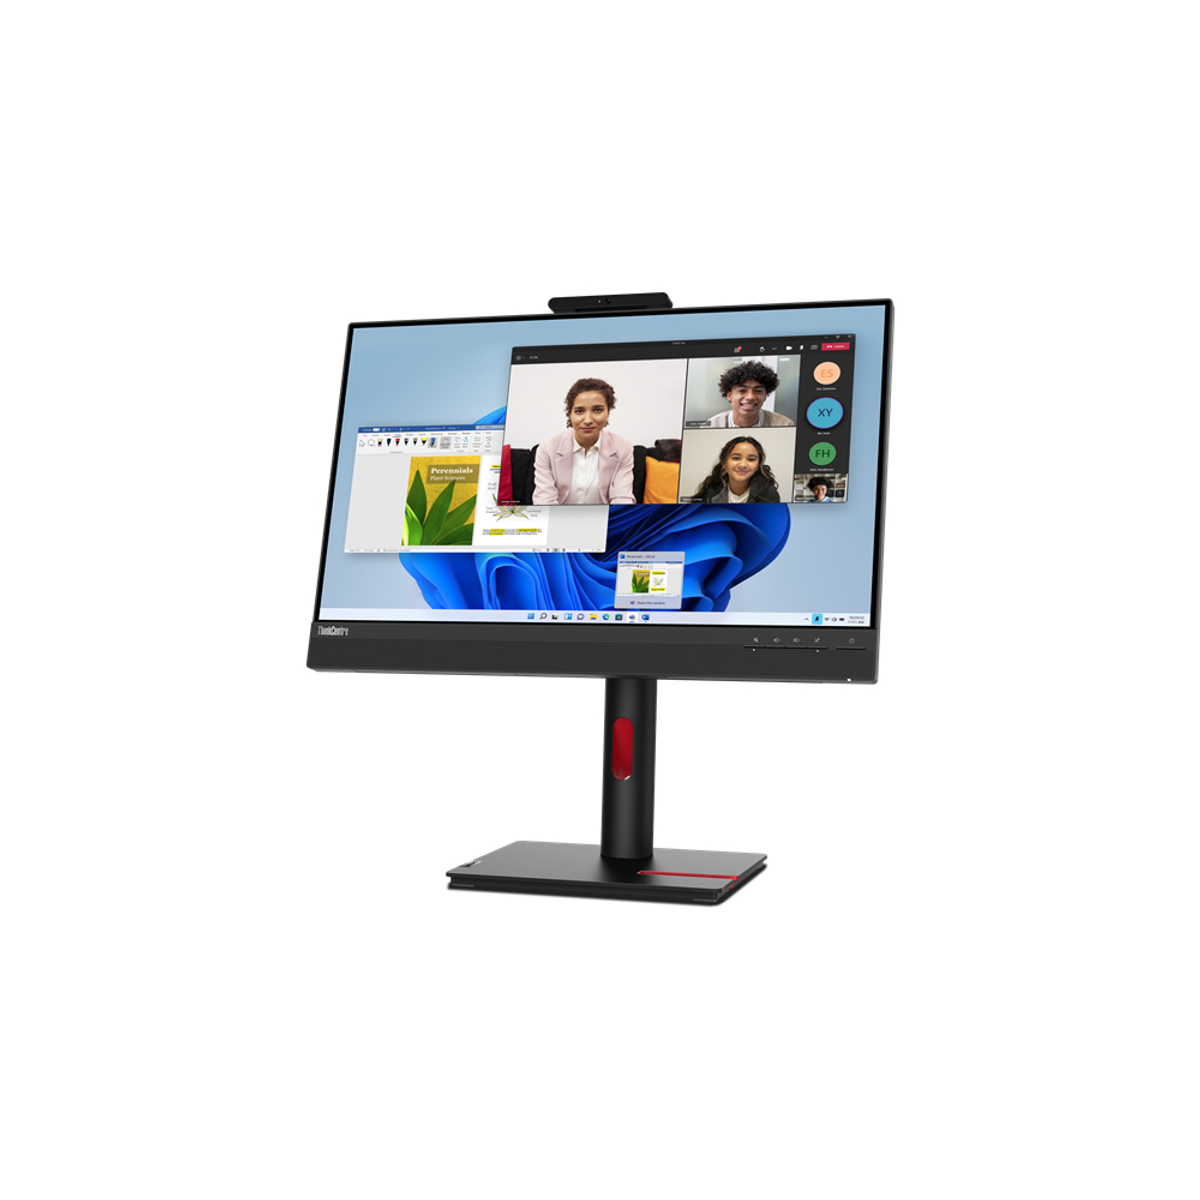 TIO 24 Tiny in One Monitor G5 Non Touch